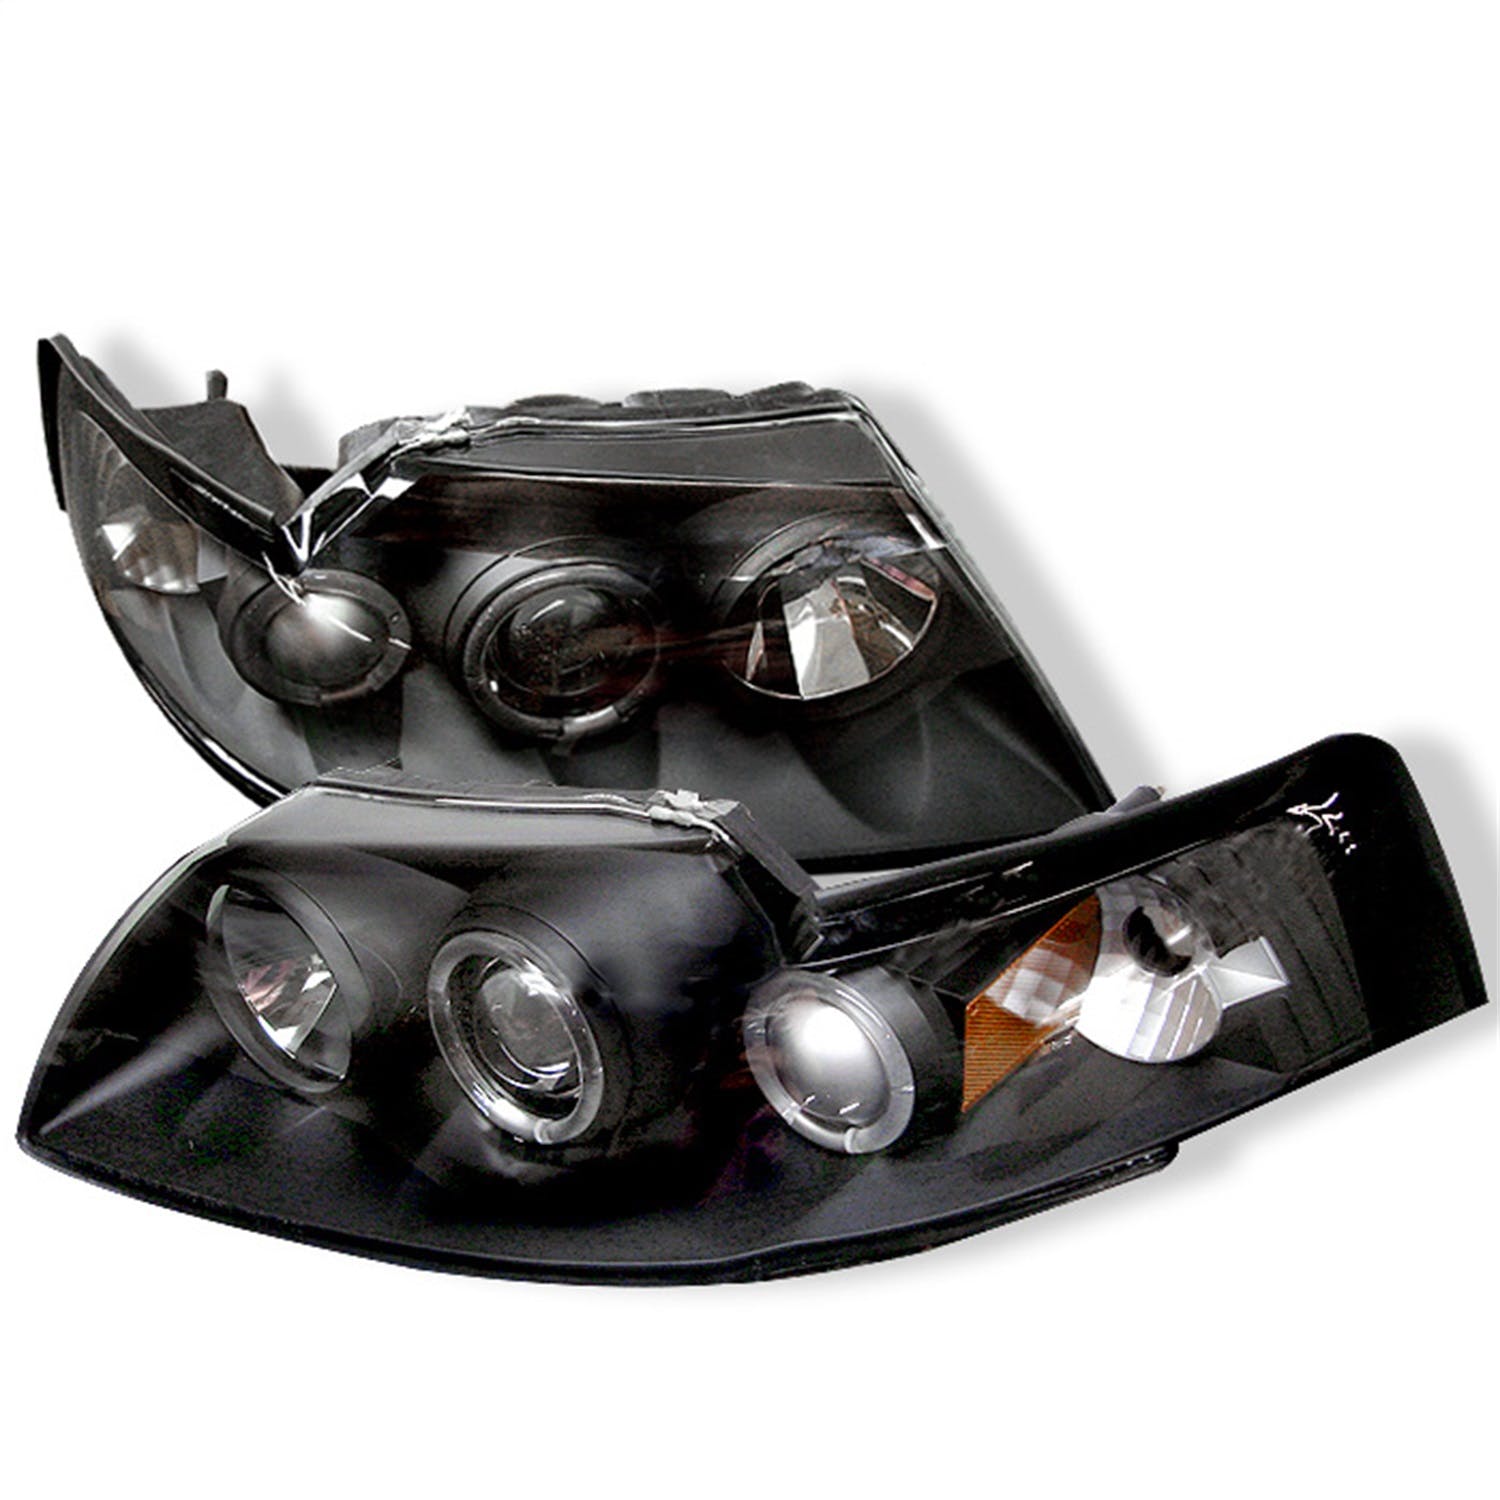 Spyder Auto 5010445 (Spyder) Ford Mustang 99-04 Projector Headlights-LED Halo-Black-High H1 (Include